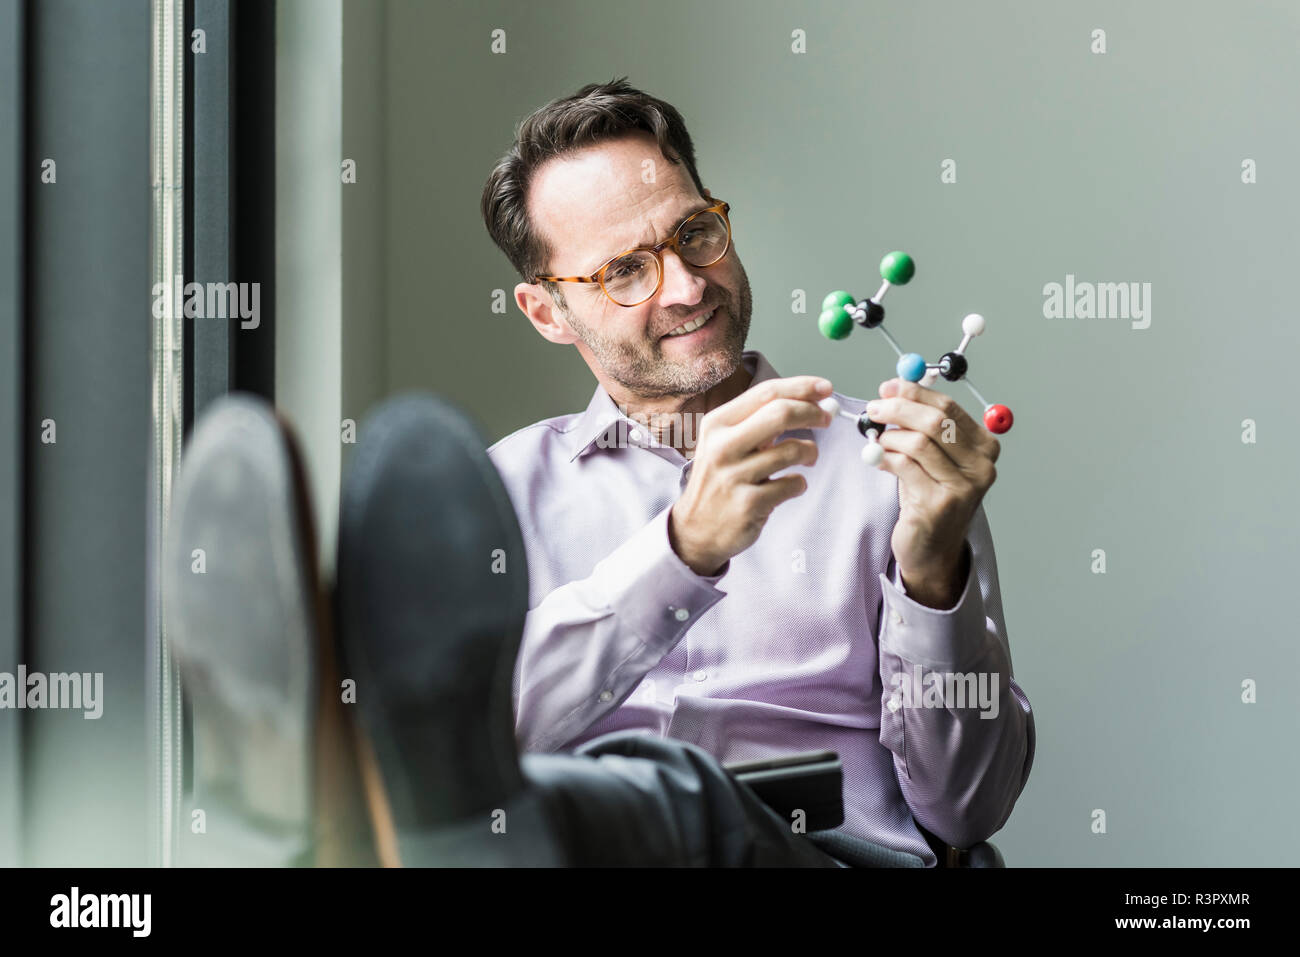 Portrait of smiling man with atomic model Stock Photo